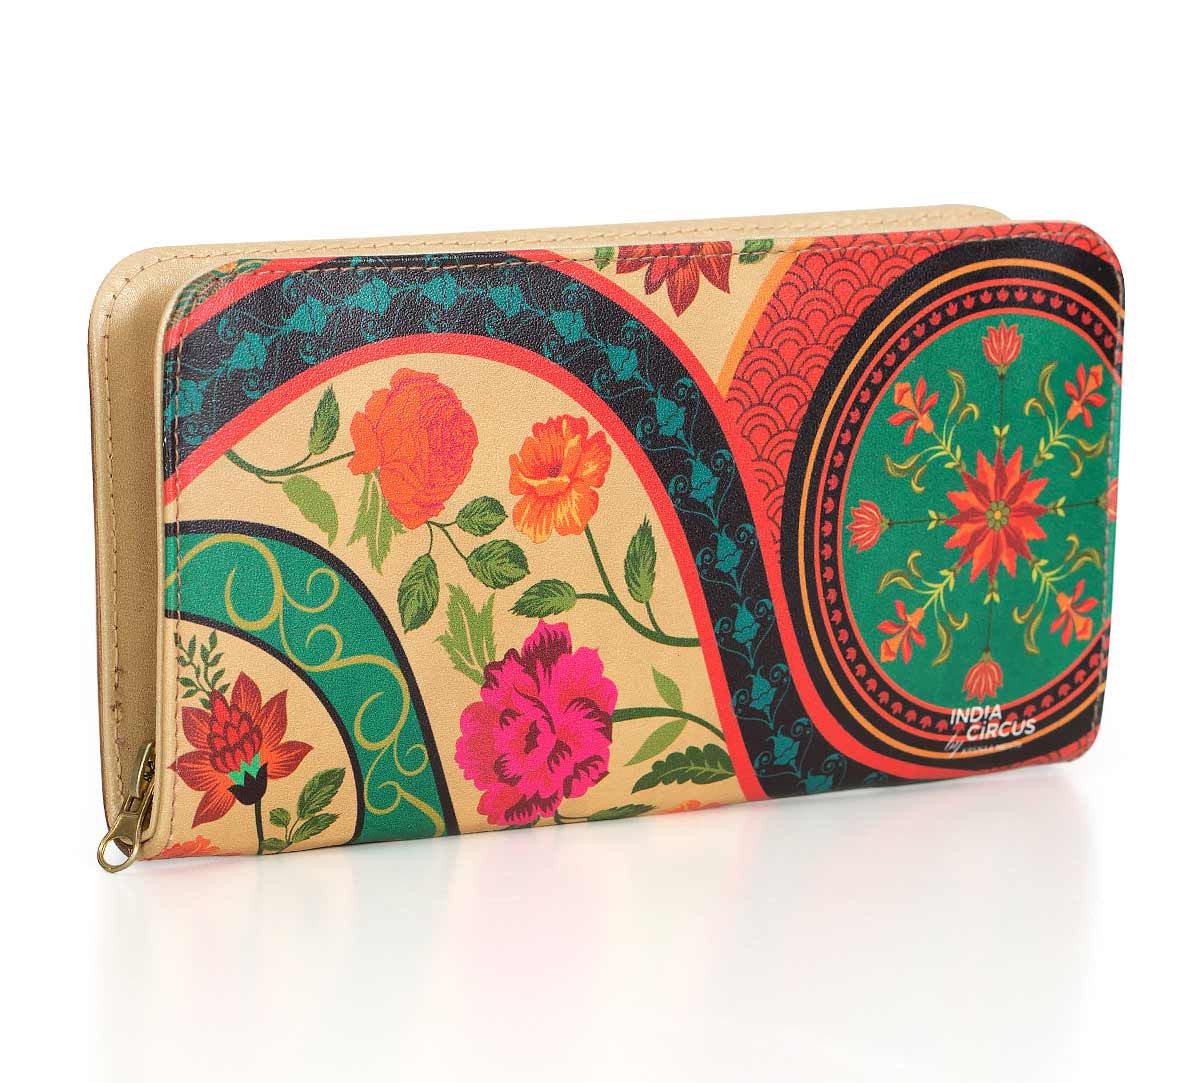 Buy stylish wallets for women | designer wallets | India Circus